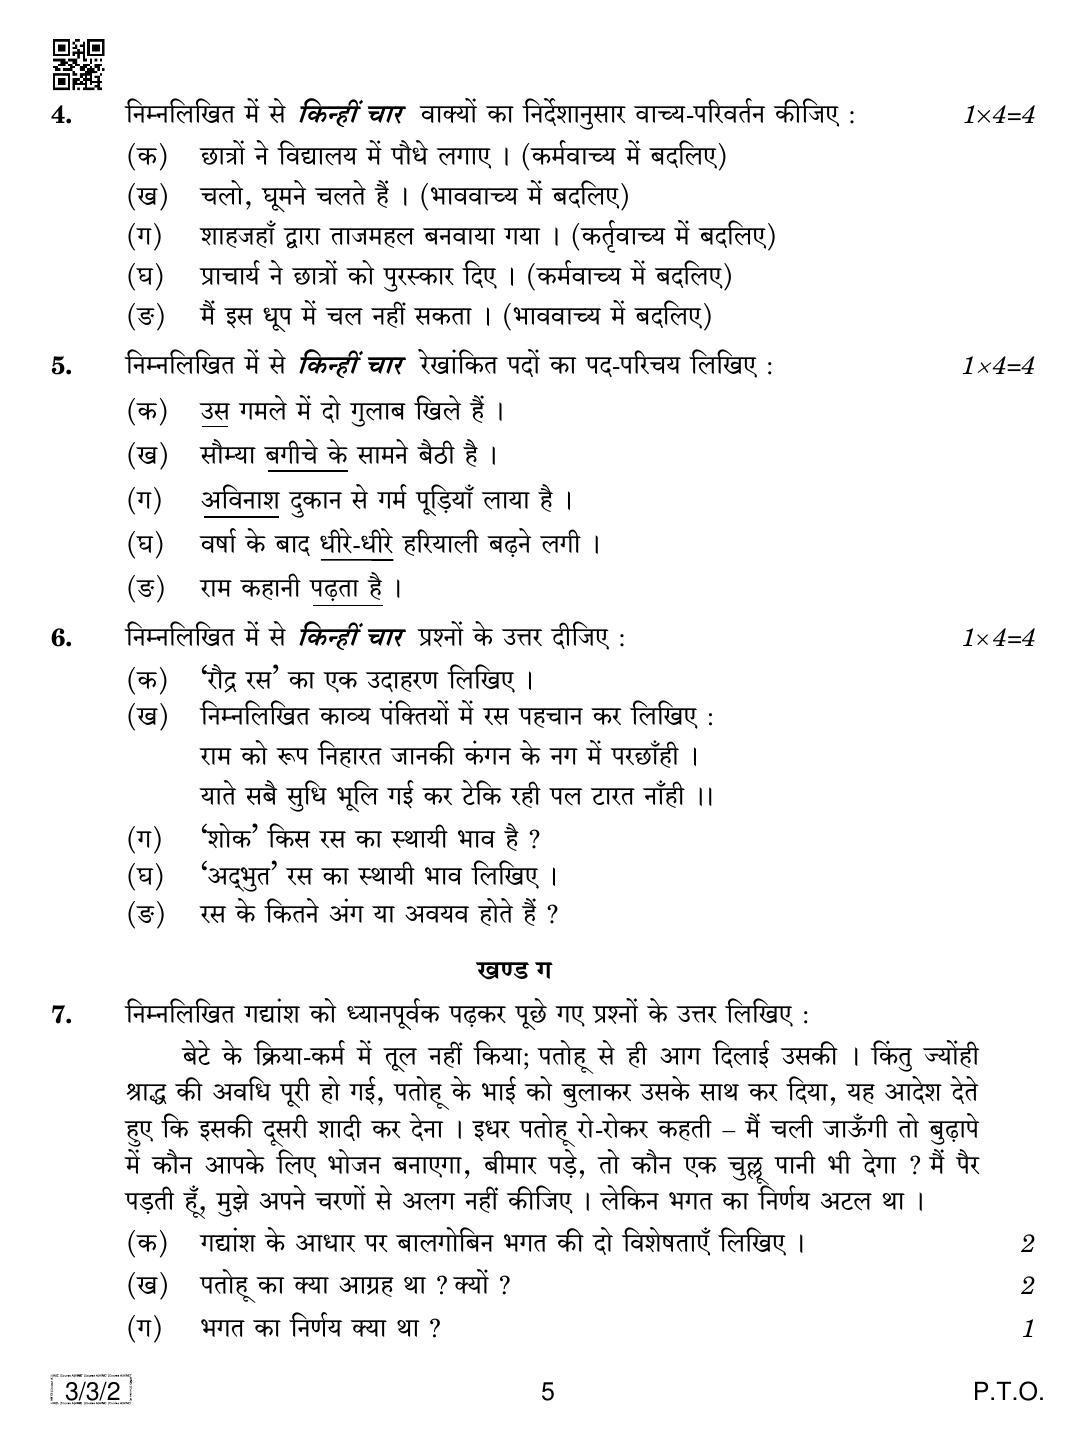 CBSE Class 10 3-3-2 HINDI COURSE- A 2019 Question Paper - Page 5